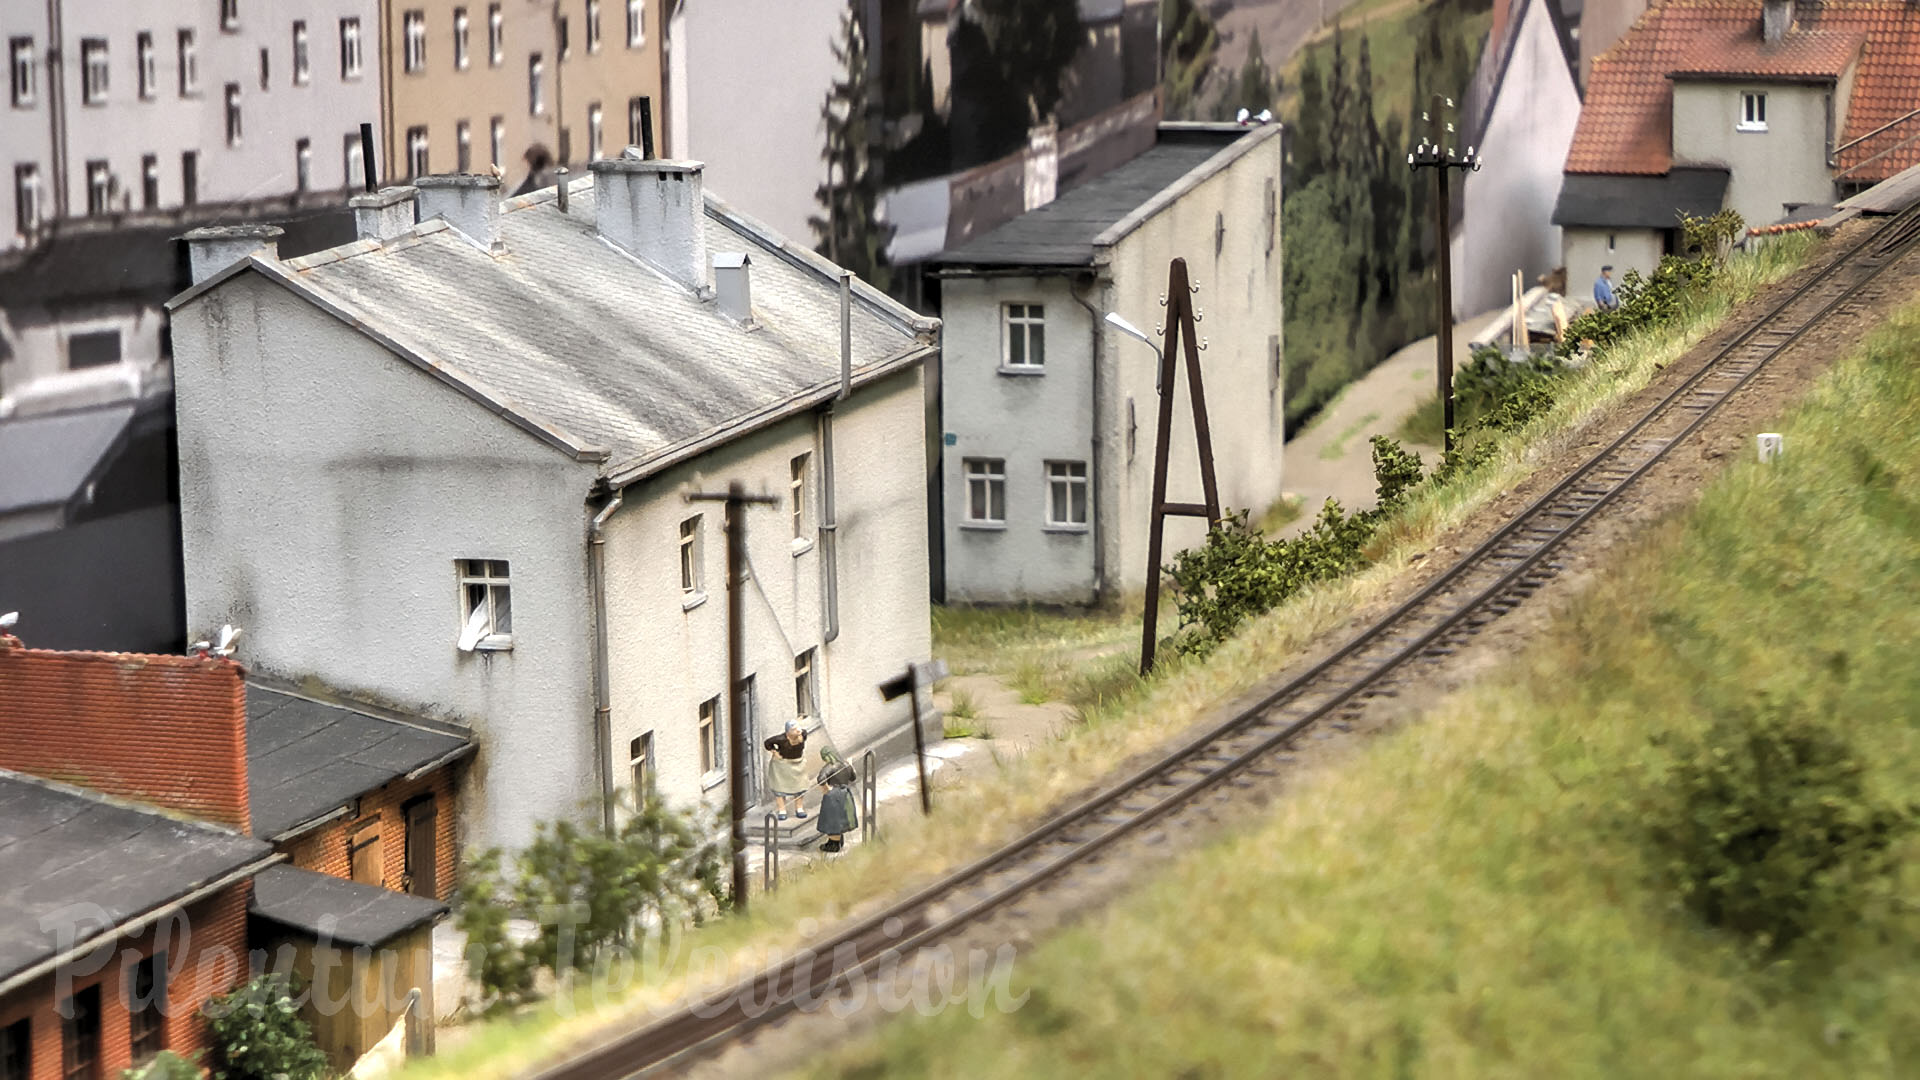 Highly Detailed Realistic HO Scale Model Railway Layout from Poland - Scratch Built Narrow-Gauge Trains